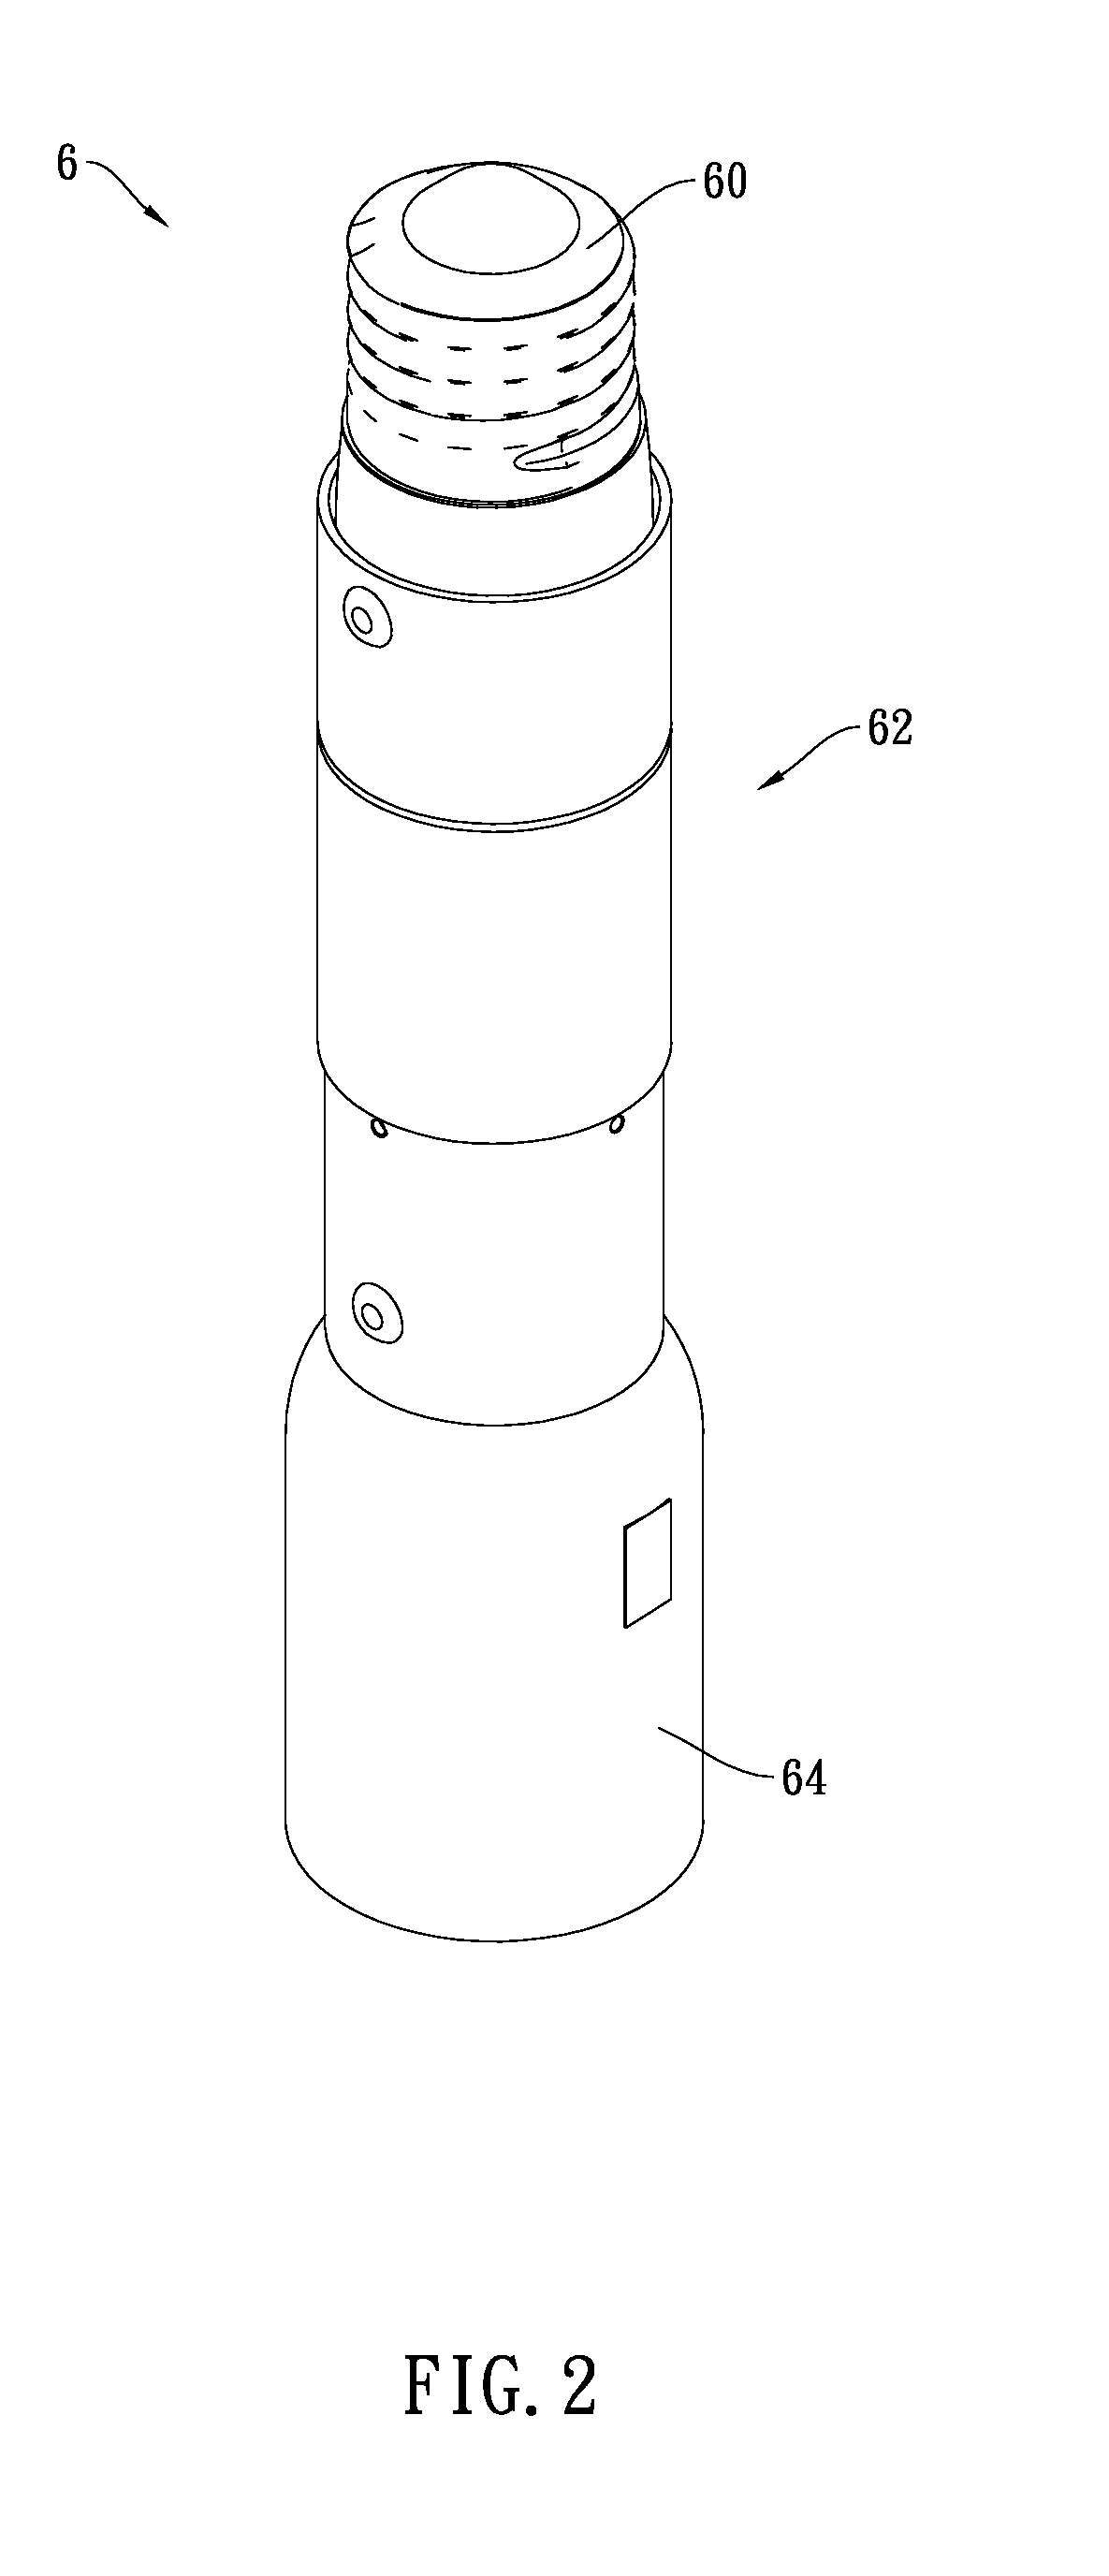 Telescopic device for securing lamp to socket